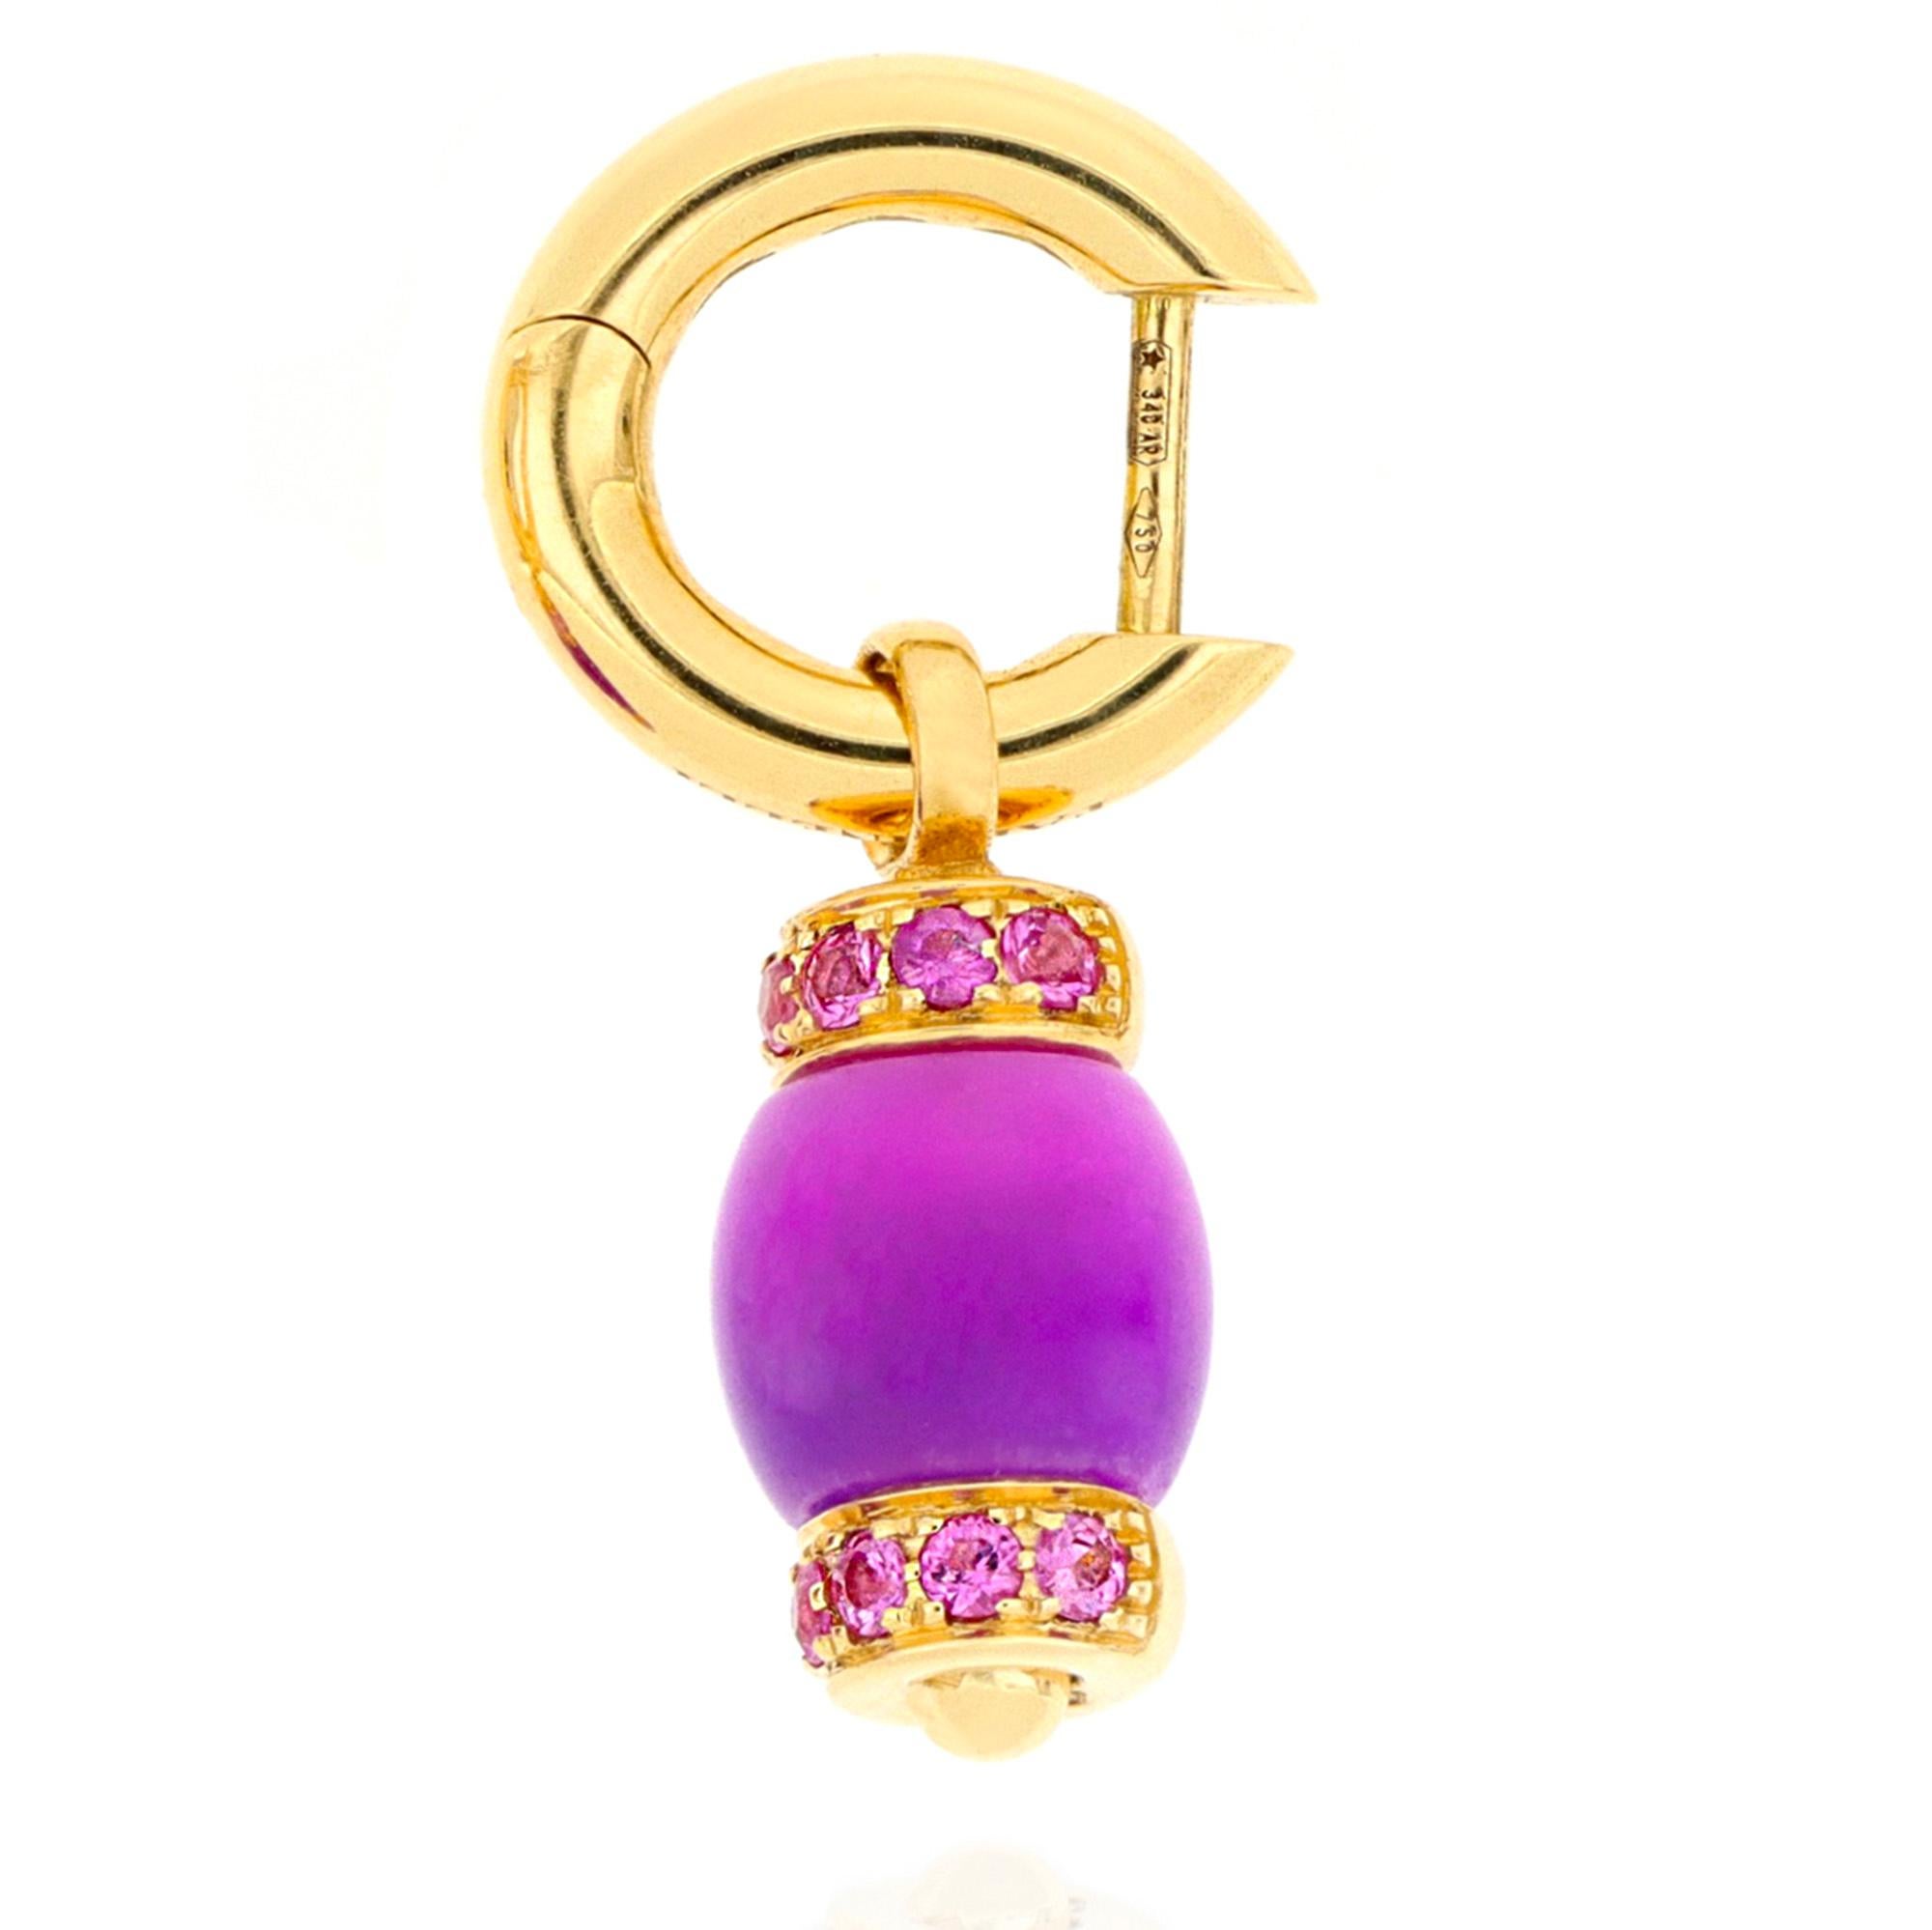 Audacity and creative flair come together in this 18-karat yellow gold earring set from Le Carrousel collection. Purple jade is ennobled by the vibrant color of pink sapphires that adorn the sides of the barrel-shaped pendant, lending a touch of